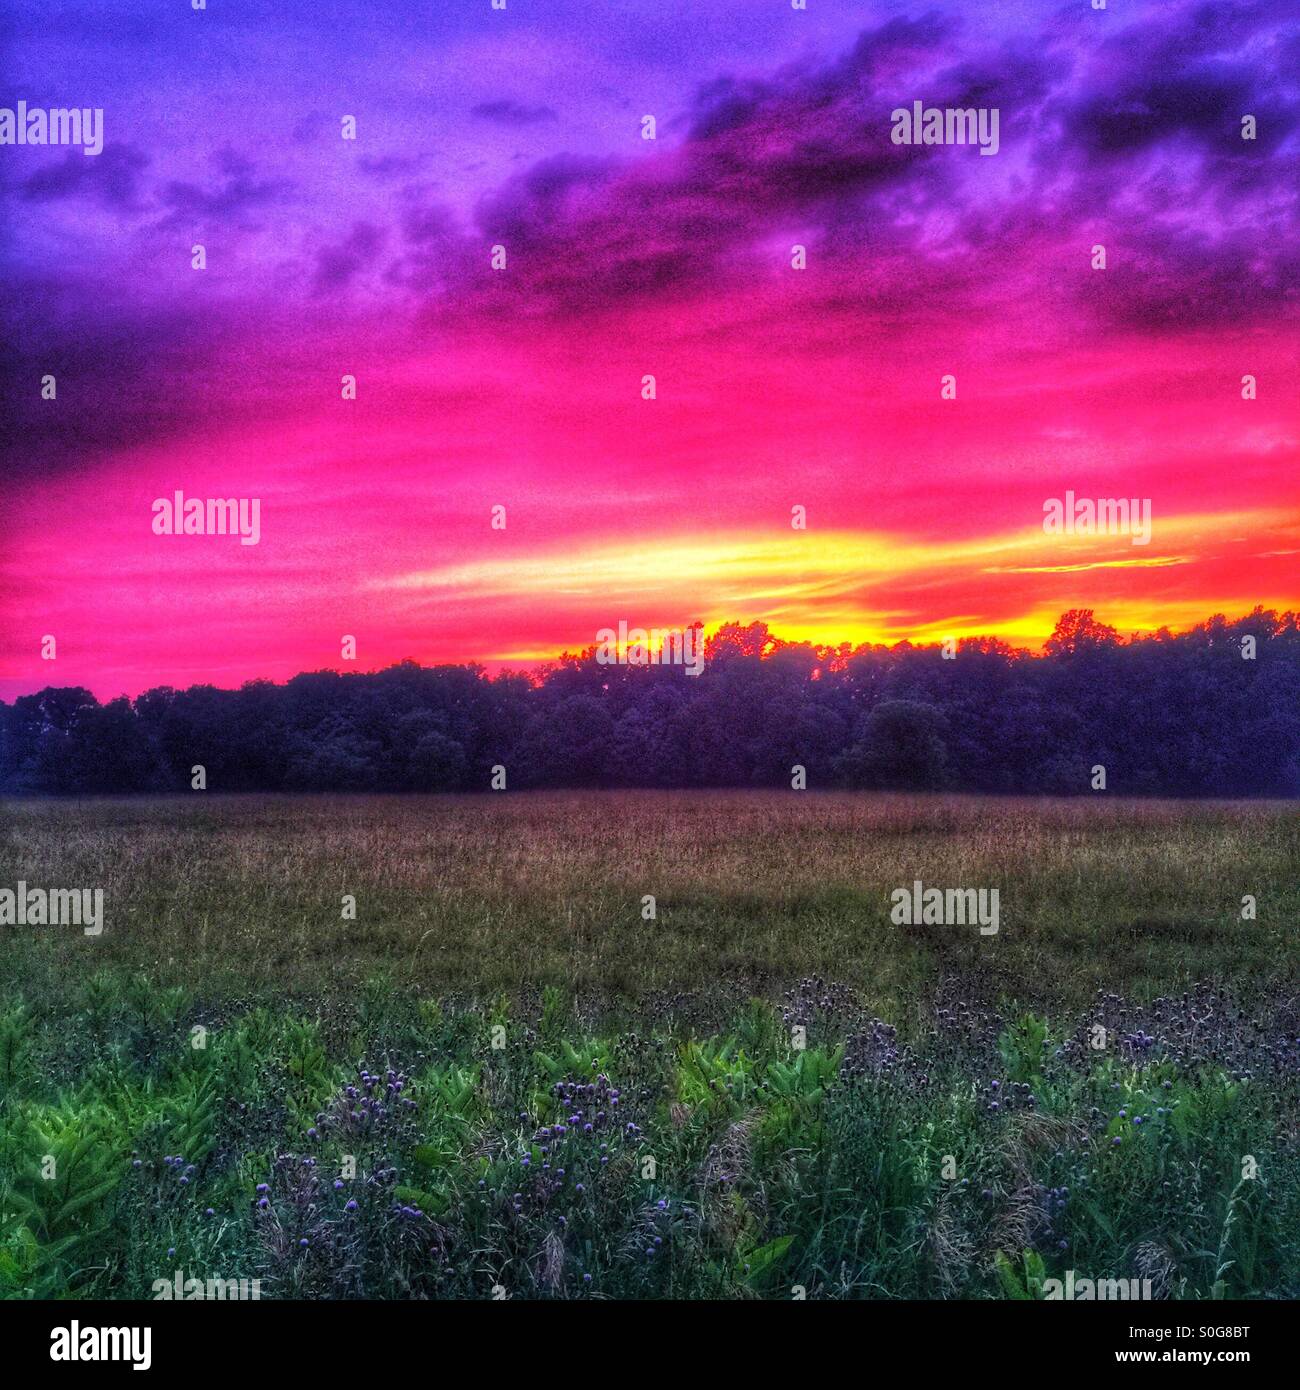 Sunset over a field of flowers Stock Photo